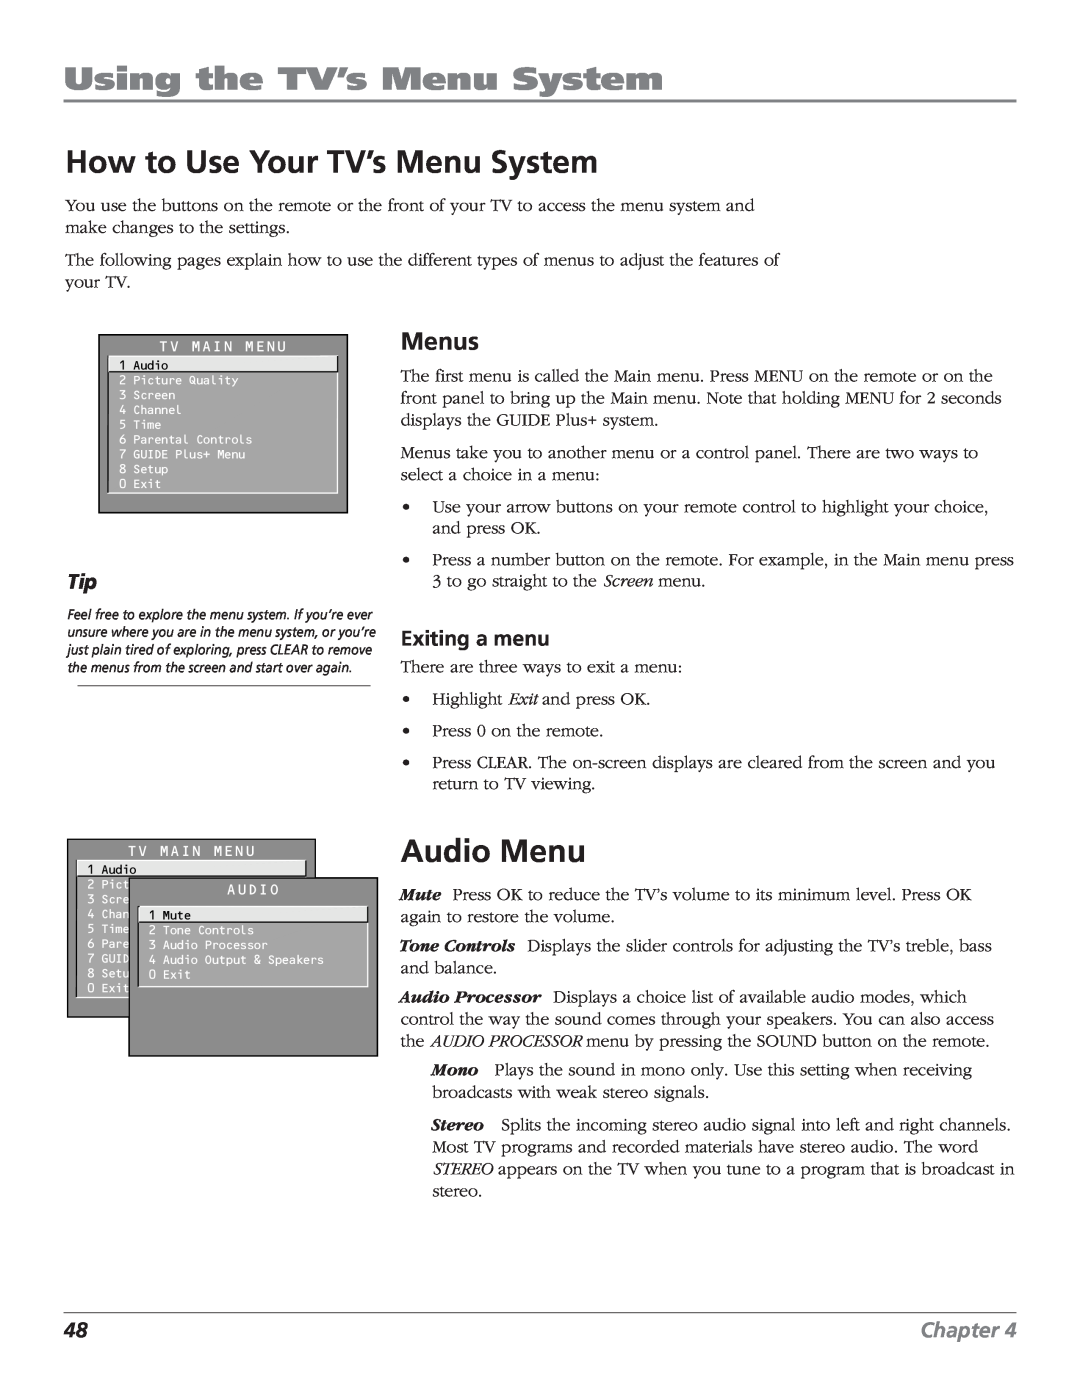 RCA MR68TF700 Using the TV’s Menu System, How to Use Your TV’s Menu System, Audio Menu, Menus, Exiting a menu, Chapter 